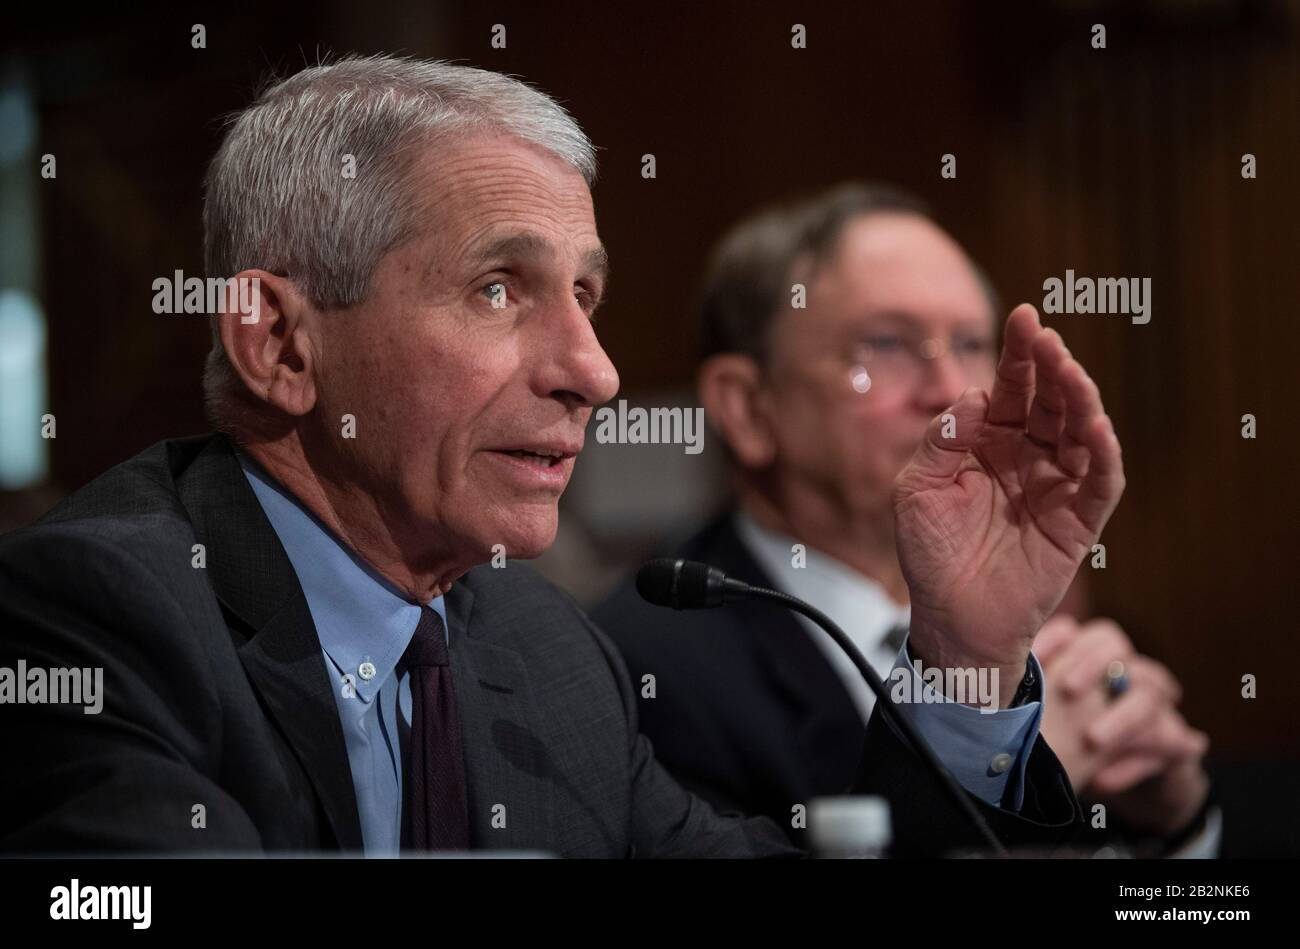 Washington, USA. 03rd Mar, 2020. Mar 3, 2020; Washington, DC, USA; Dr. Anthony Fauci, director, National Institute Of Allergy And Infectious Diseases, National Institutes of Health at the U.S. Senate Committee on Health, Education, Labor and Pensions hearing on how the U.S. Is Responding to COVID-19, the Novel Coronavirus on March 3, 2020 in Washington, DC. Mandatory Credit: Jack Gruber-USA TODAY /Sipa USA Credit: Sipa USA/Alamy Live News Stock Photo